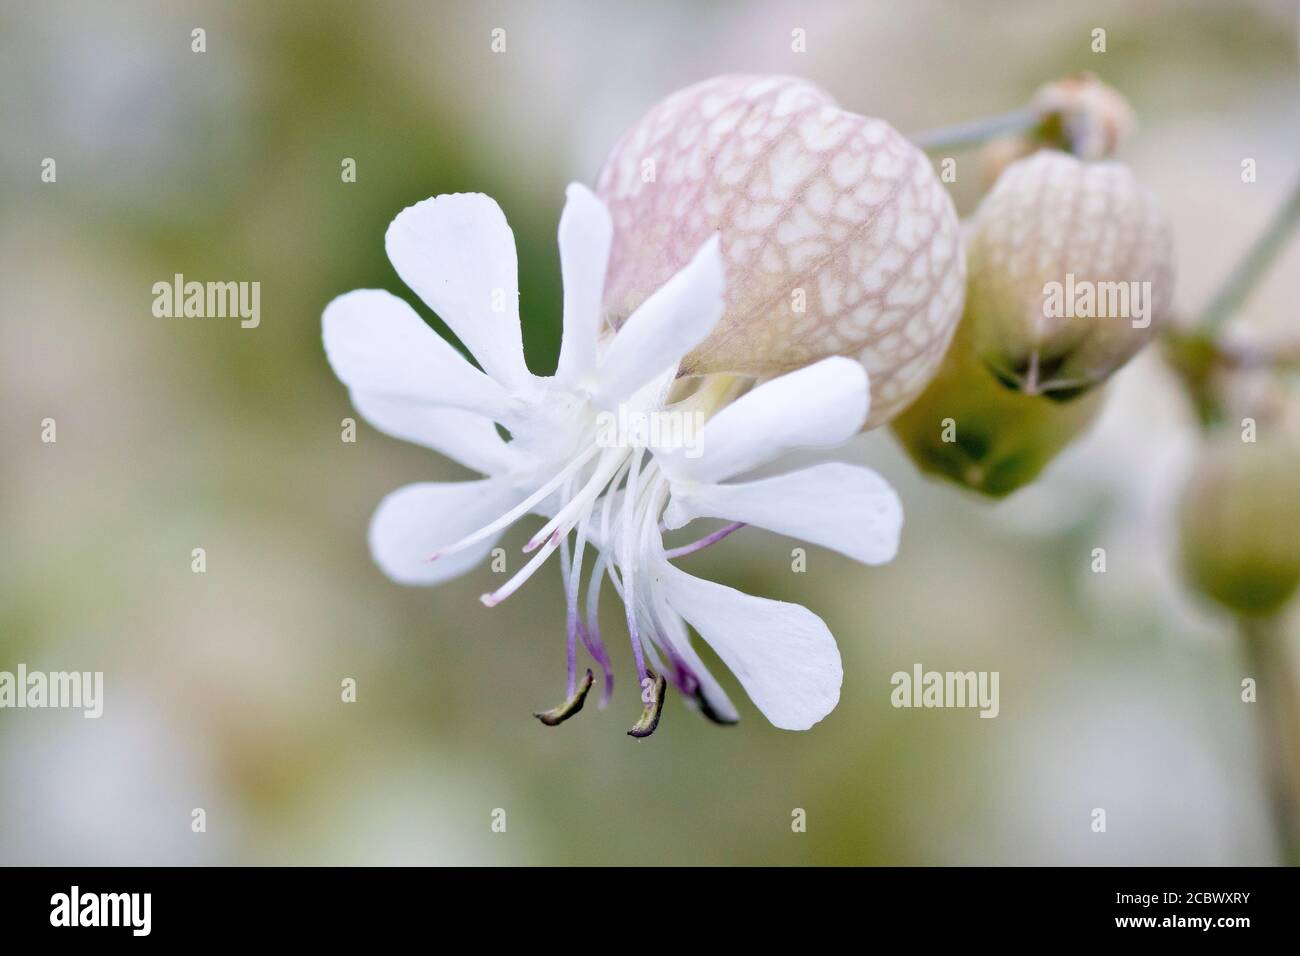 Bladder Campion (silene vulgaris), close up showing the flower and large swollen bladder-like sepal tube, isolated against an out of focus background. Stock Photo